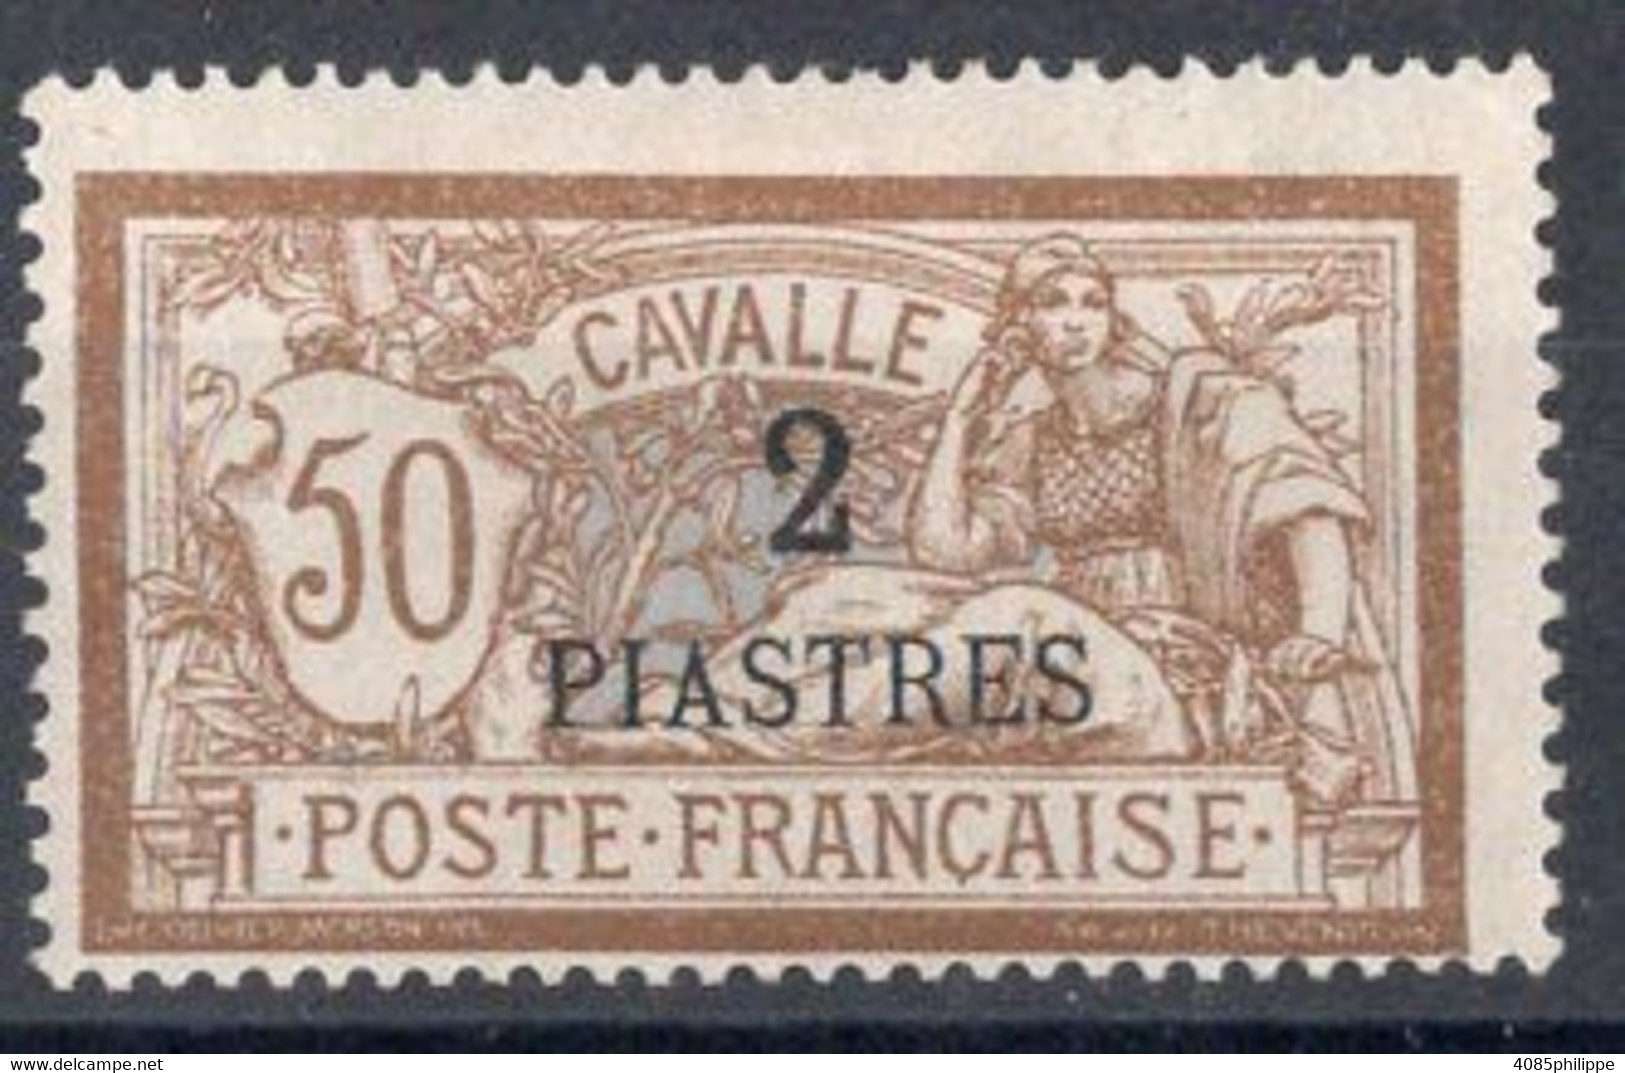 Cavalle Timbre-poste N°14*  Neuf Charnière Cote : 16€00 - Nuevos